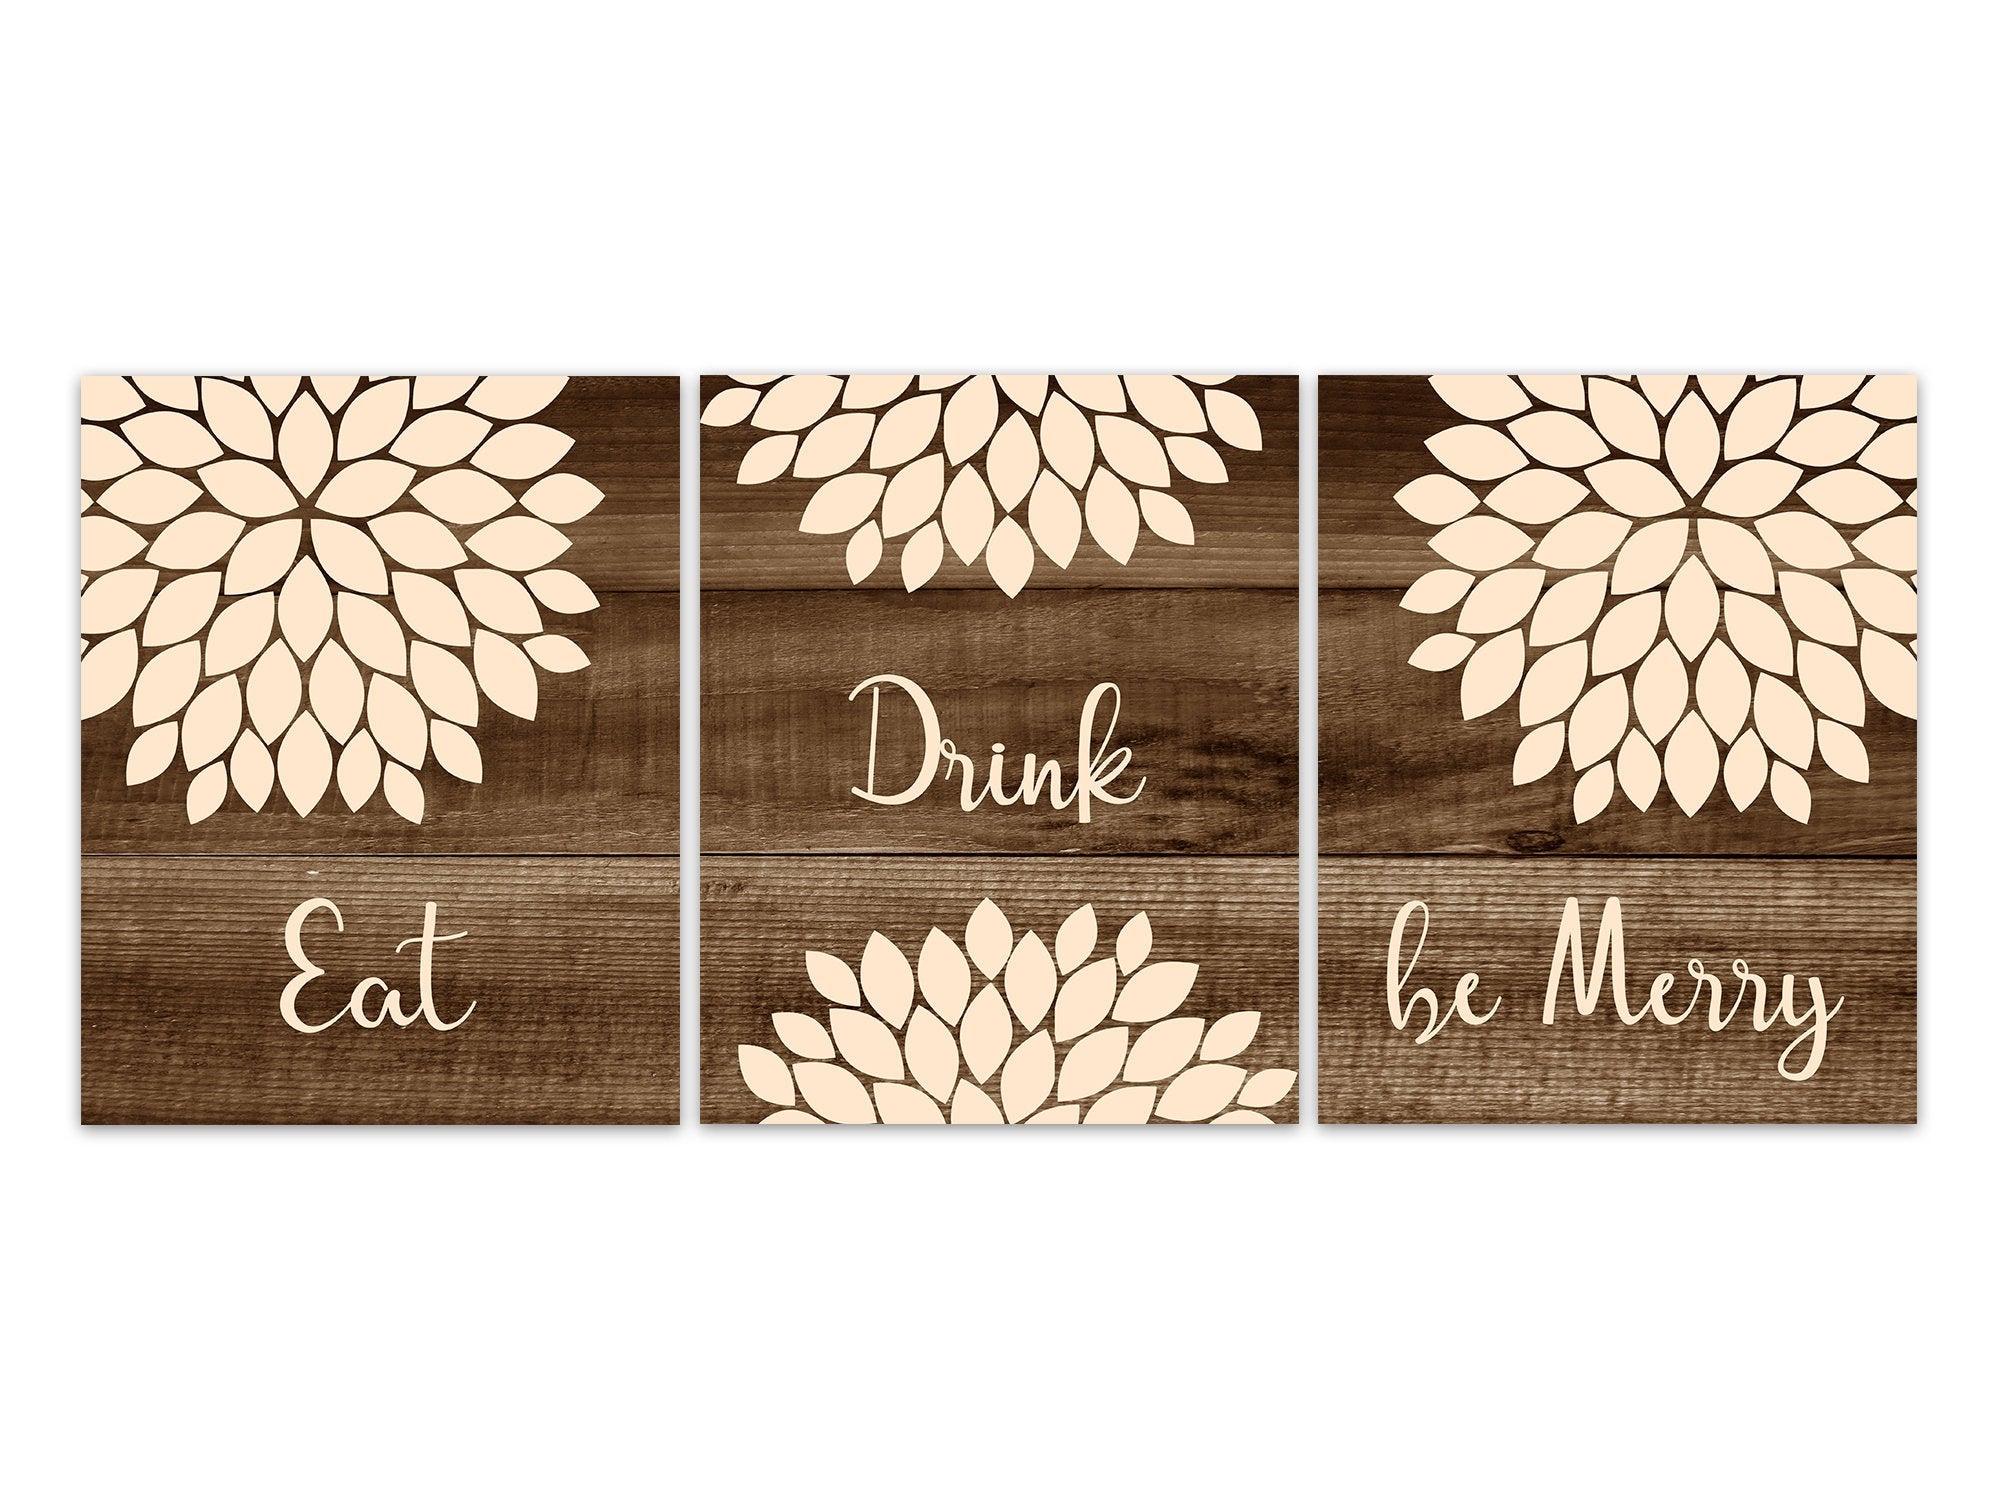 Eat Drink be Merry Kitchen Quote Art Prints, Rustic Kitchen Decor, Farmhouse Decor, Brown Rustic Dining Room Canvas Wall Art - HOME590